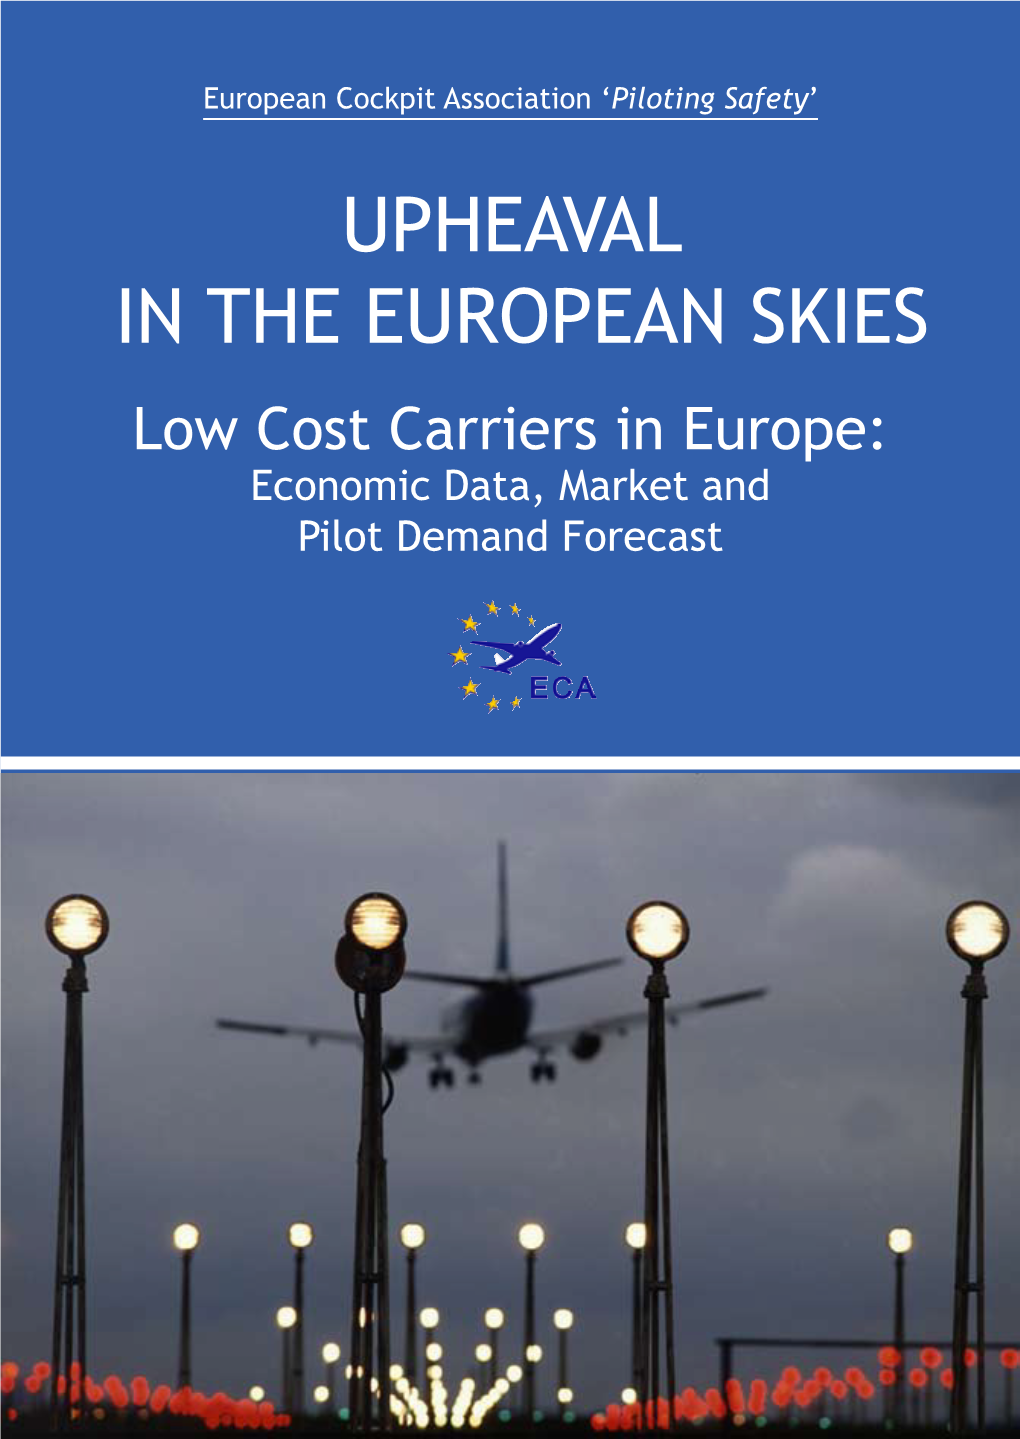 UPHEAVAL in the EUROPEAN SKIES Low Cost Carriers in Europe: Economic Data, Market and Pilot Demand Forecast Upheaval in the European Skies